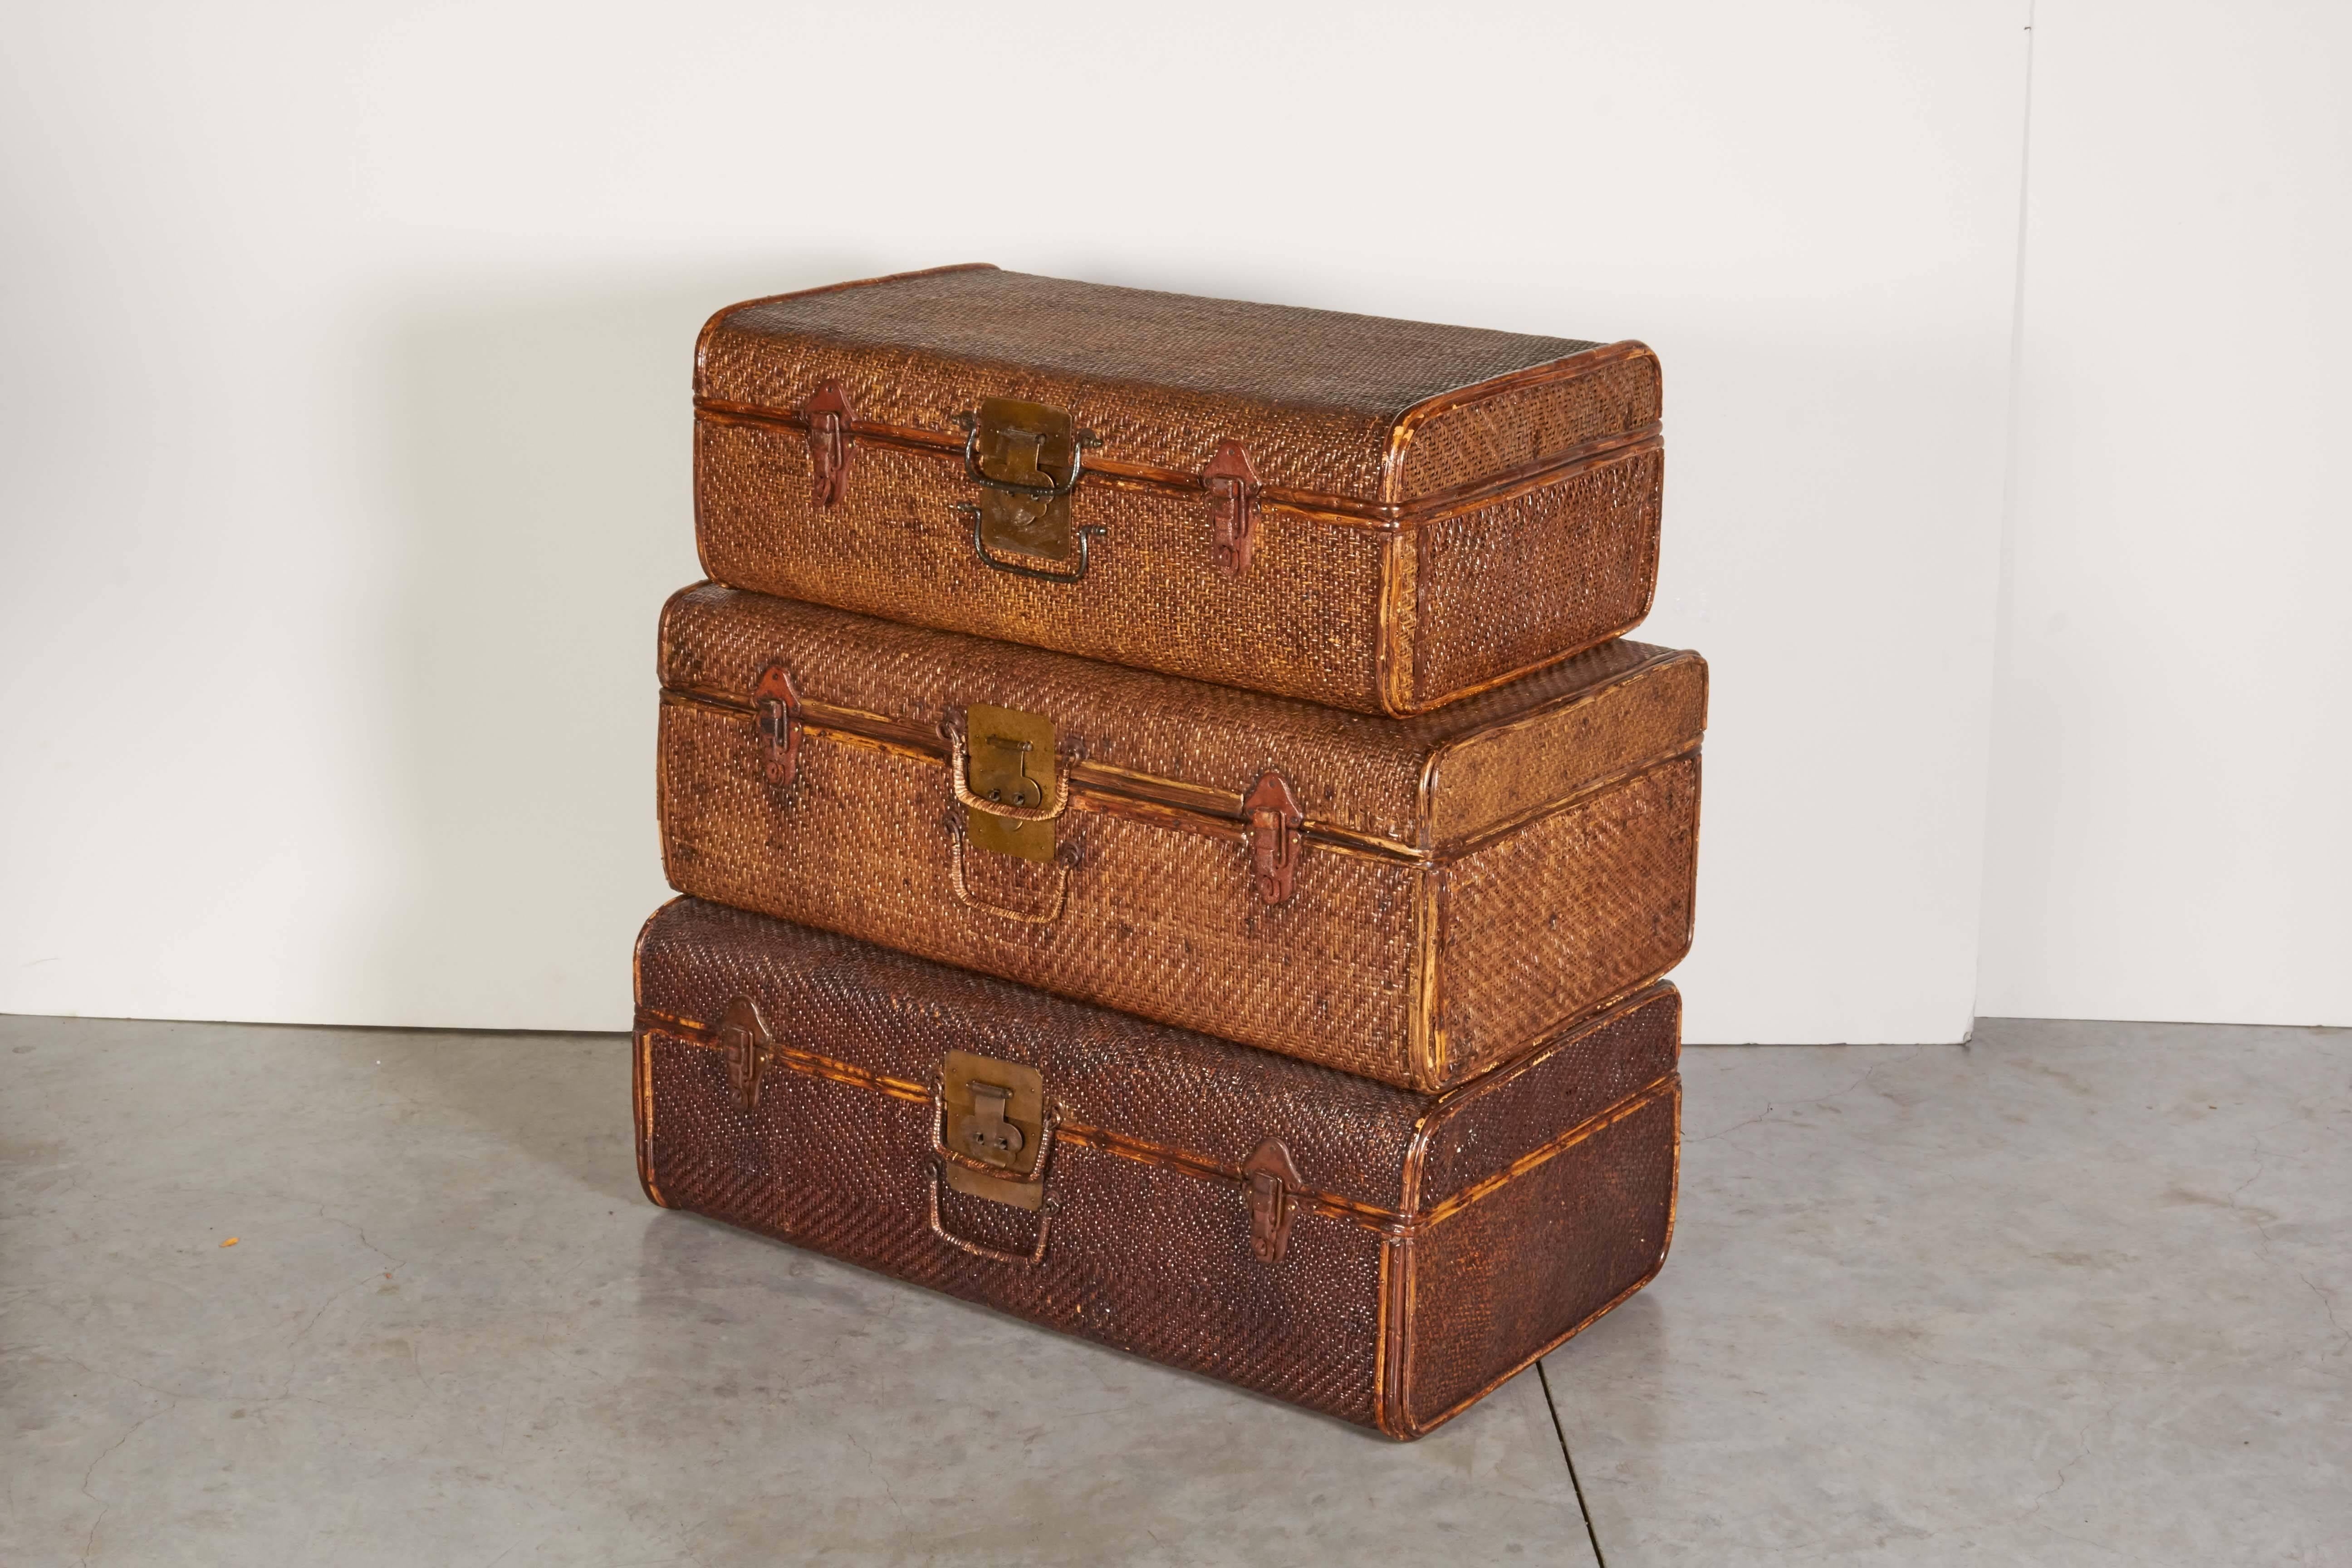 A collection of three handmade rattan suitcases with beautifully finished wooden interiors. All in great condition. These work great as coffee tables, side tables, and storage pieces in addition to being highly decorative objects.
CST101.